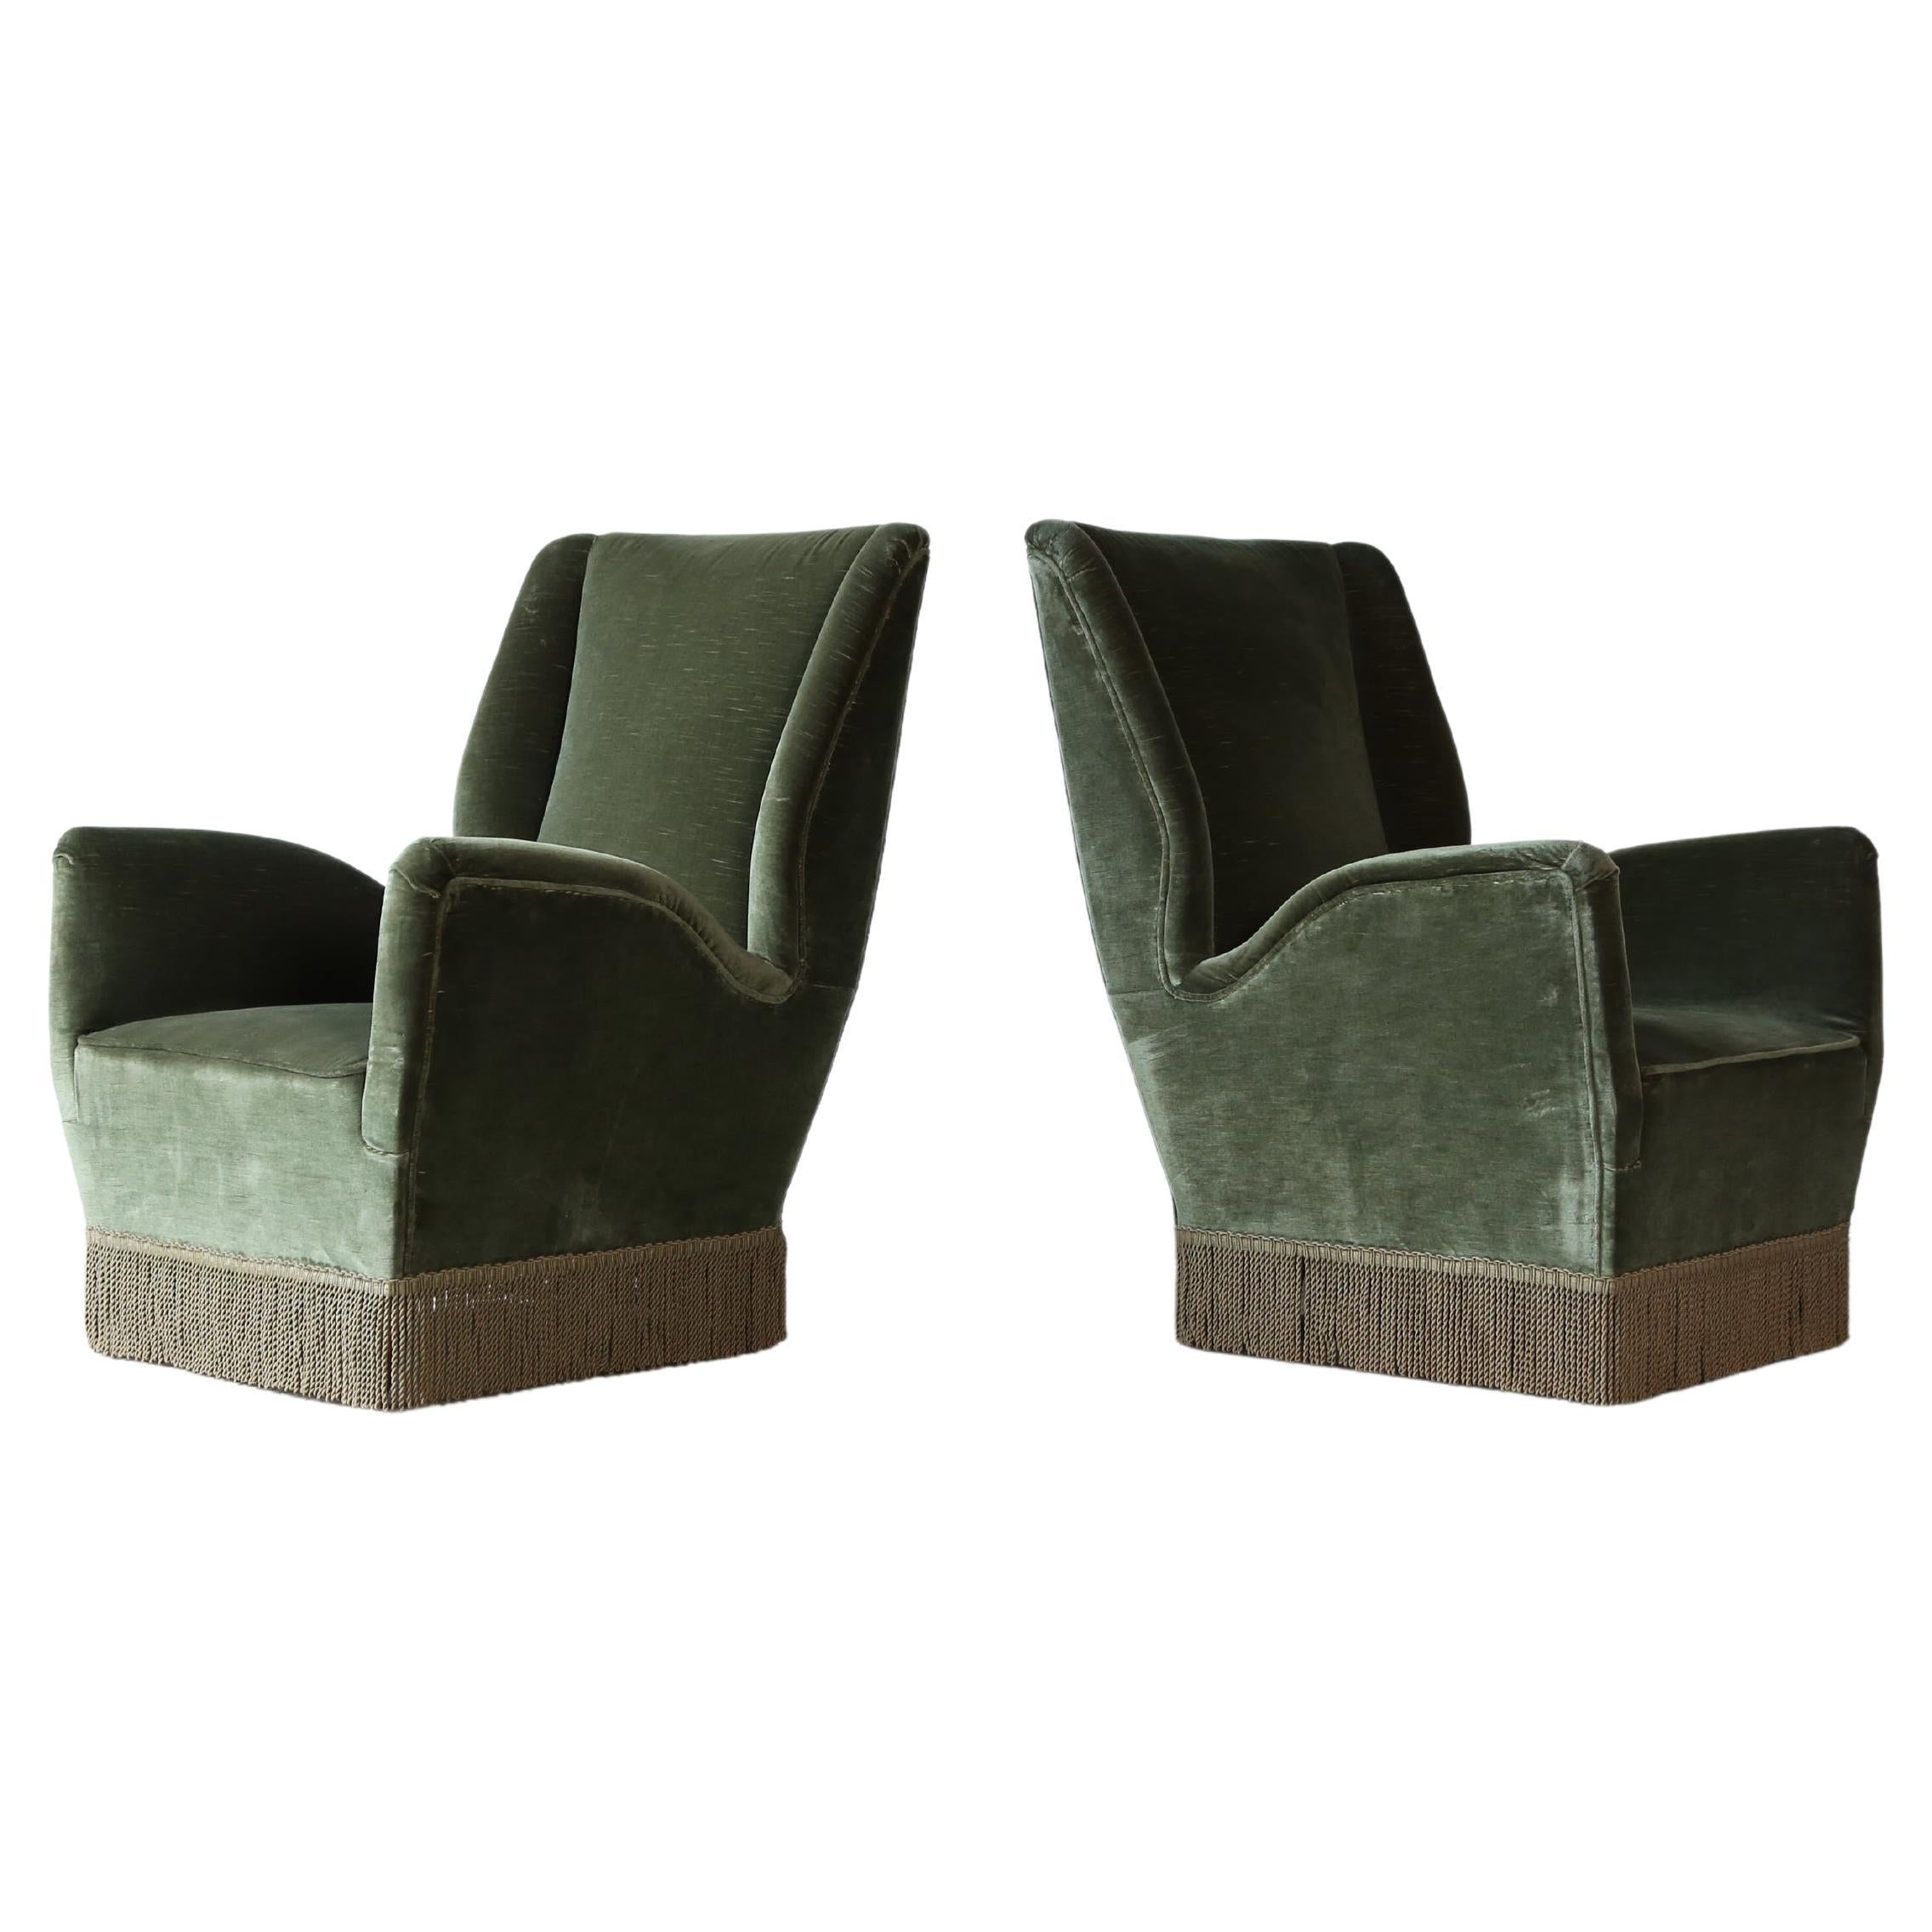 A very rare pair of Gio Ponti 512 armchairs, retaining their original green velvet, ISA Bergamo, Italy, 1950s. The original fabric shows only minor signs of use and wear. Fast shipping worldwide.






